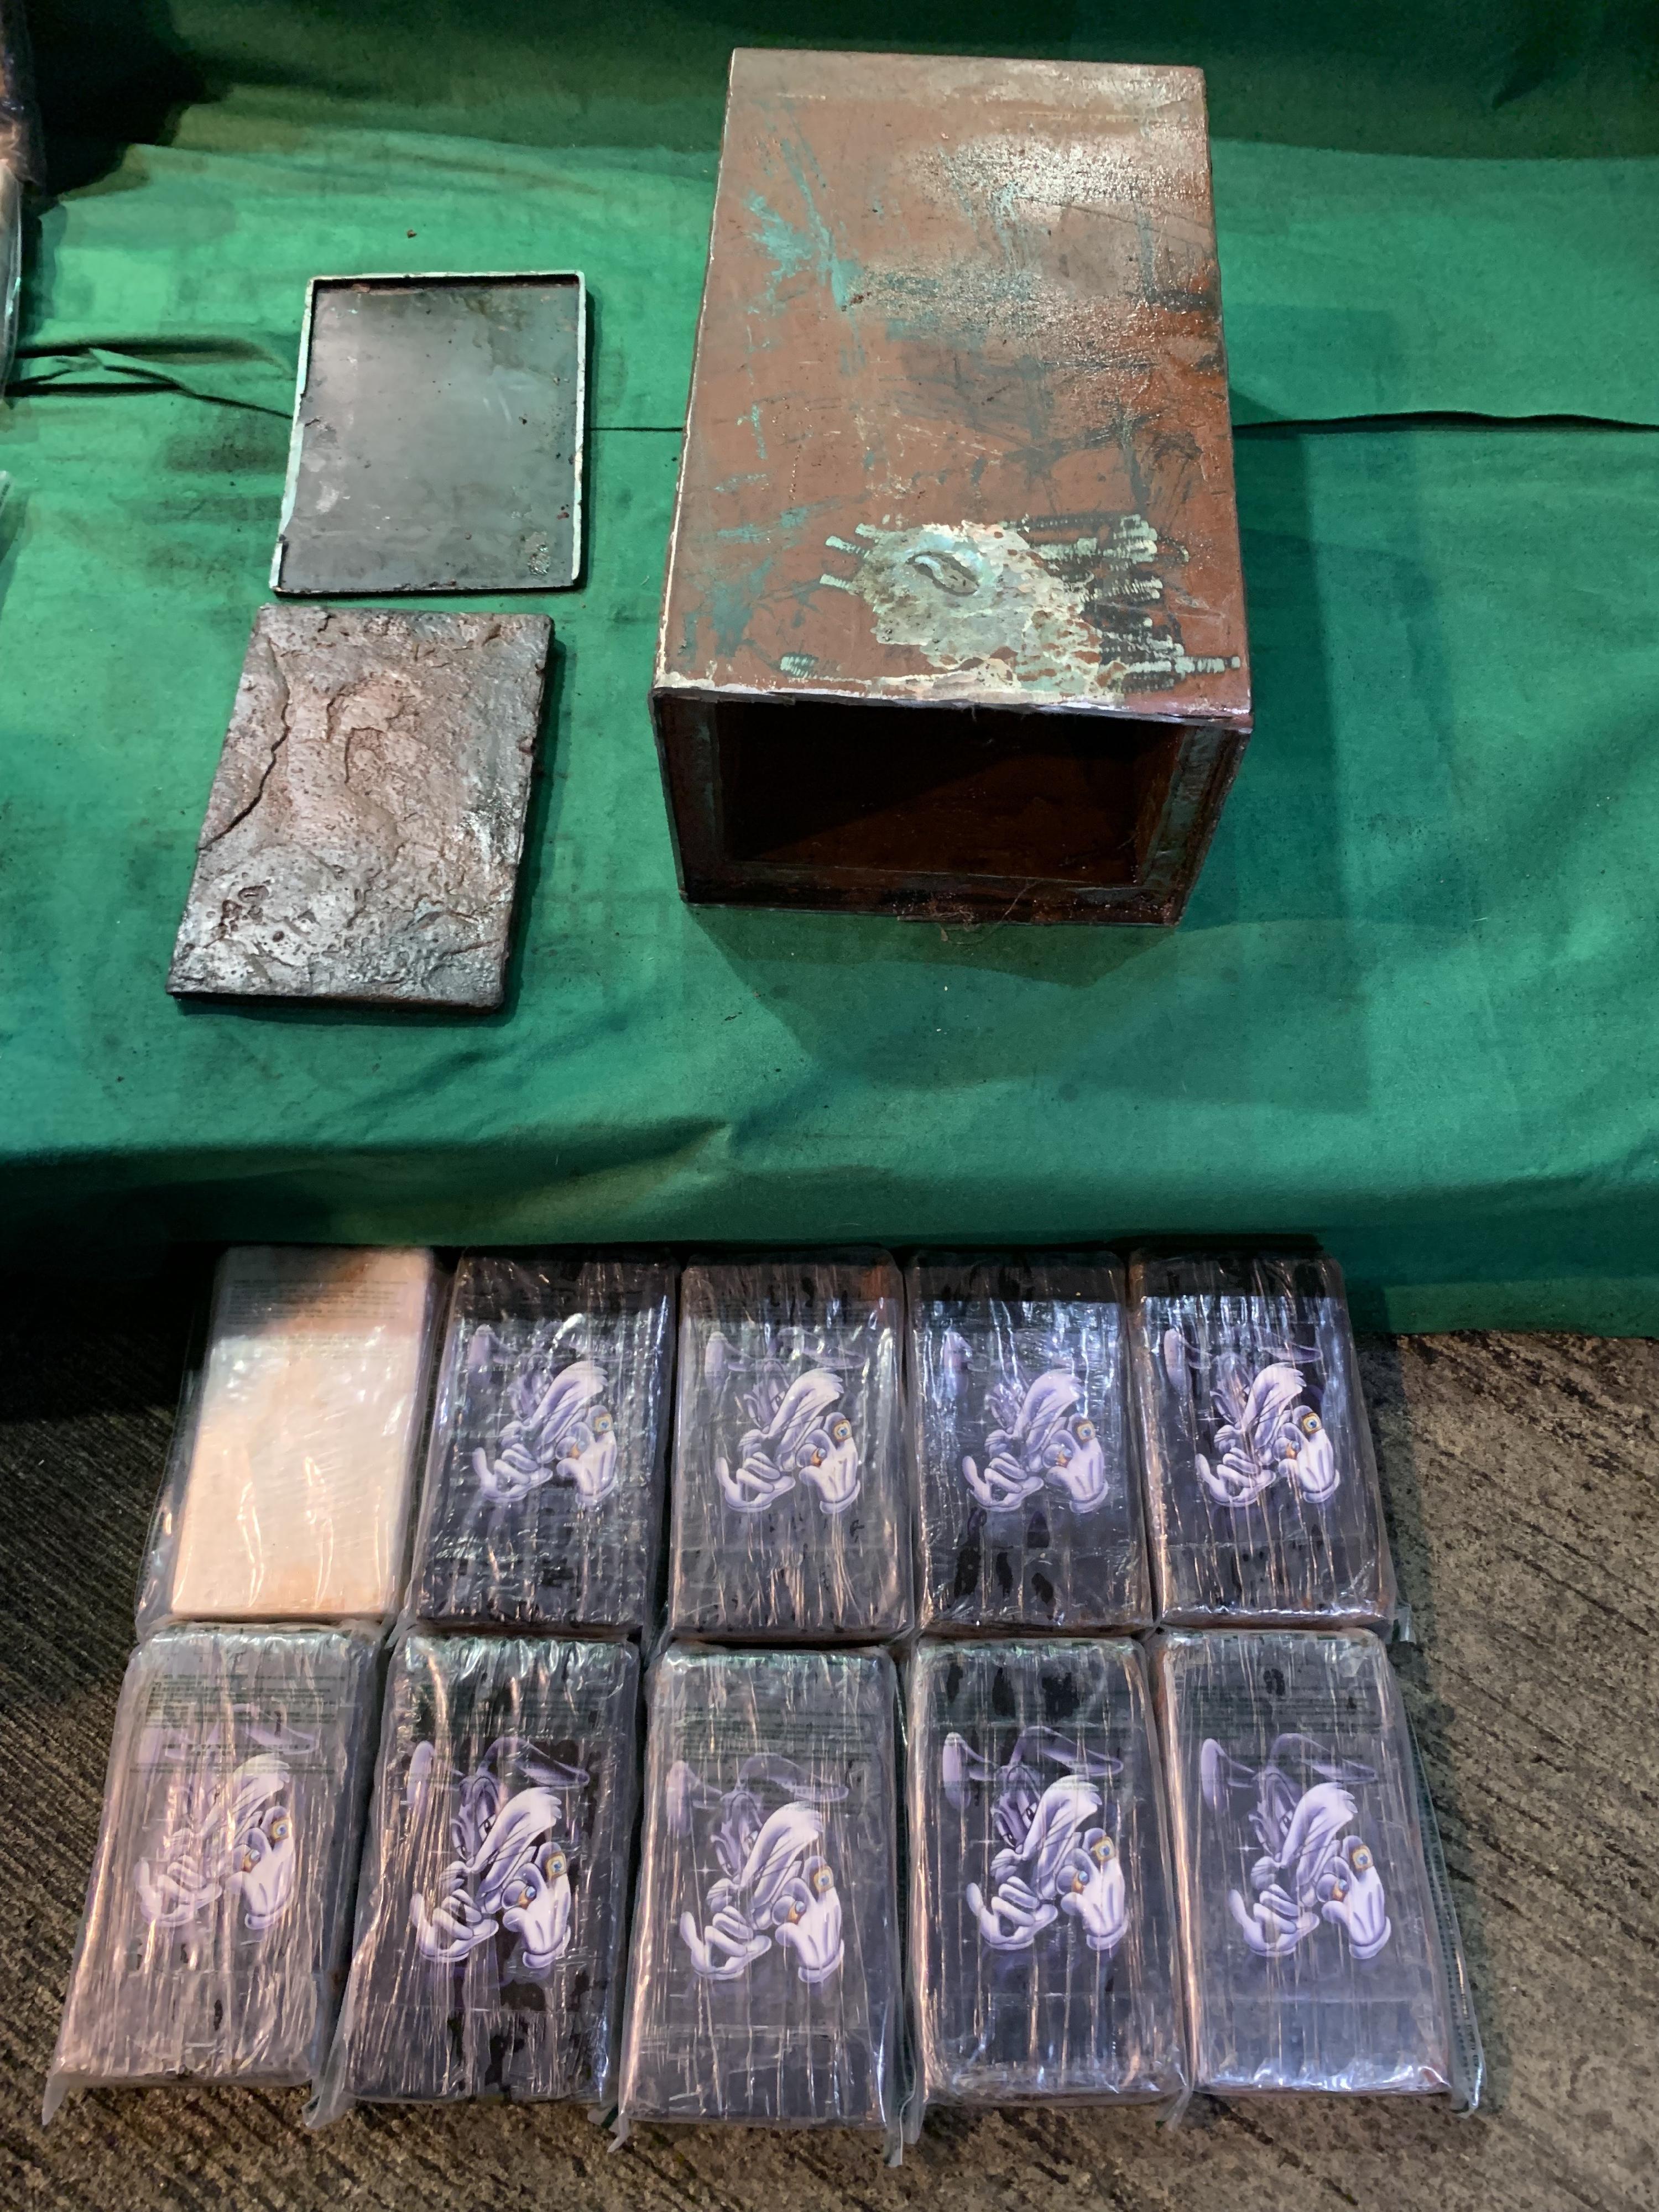 Hong Kong Customs detected a suspected drug trafficking case using large-scale electric transformer last month and seized about 120 kilograms of suspected cocaine with an estimated market value of about $110 million. Photo shows some of the suspected cocaine seized and the metal box used to conceal the drugs.